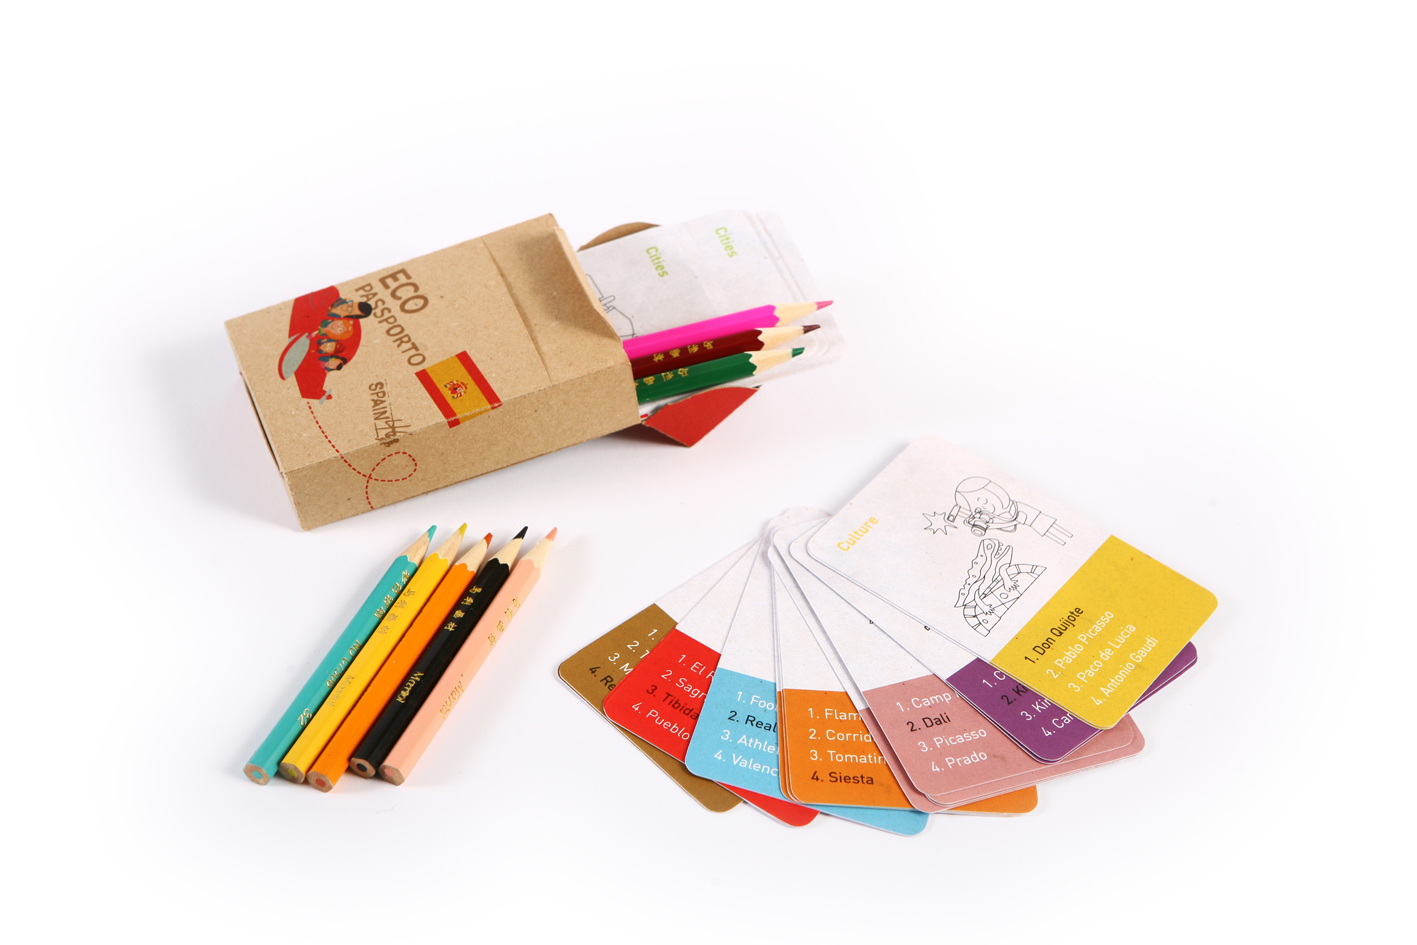 Coloring pencils and small cards with shapes to color and small portions of text on orange, blue, pink, etc.